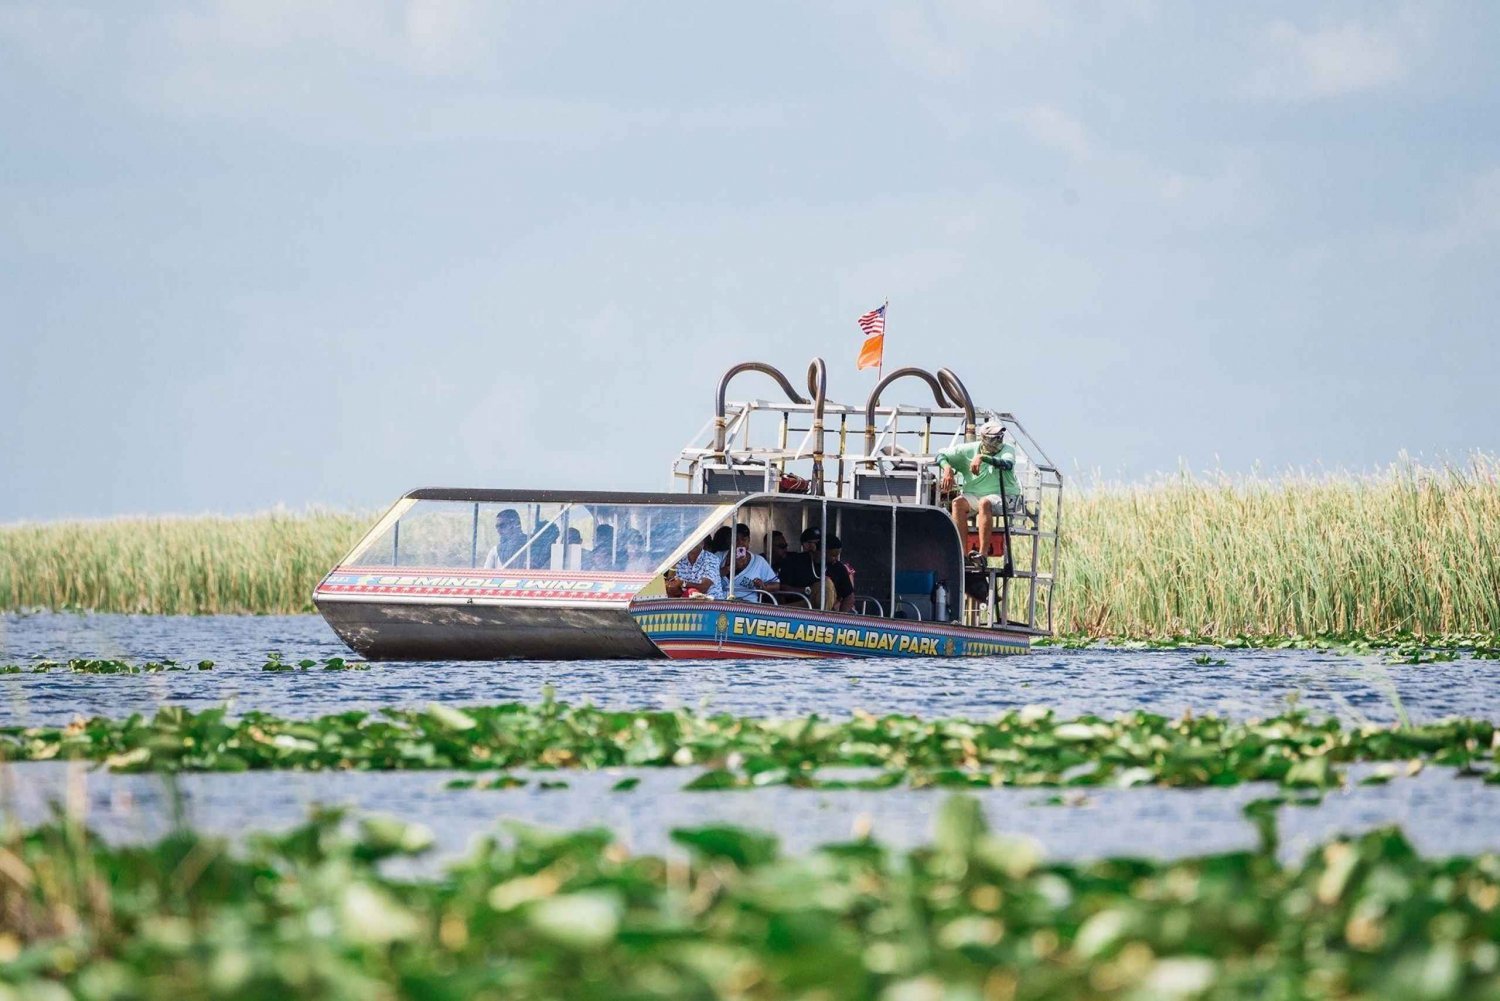 Miami: Wild Everglades Airboat ride and Gator encounters